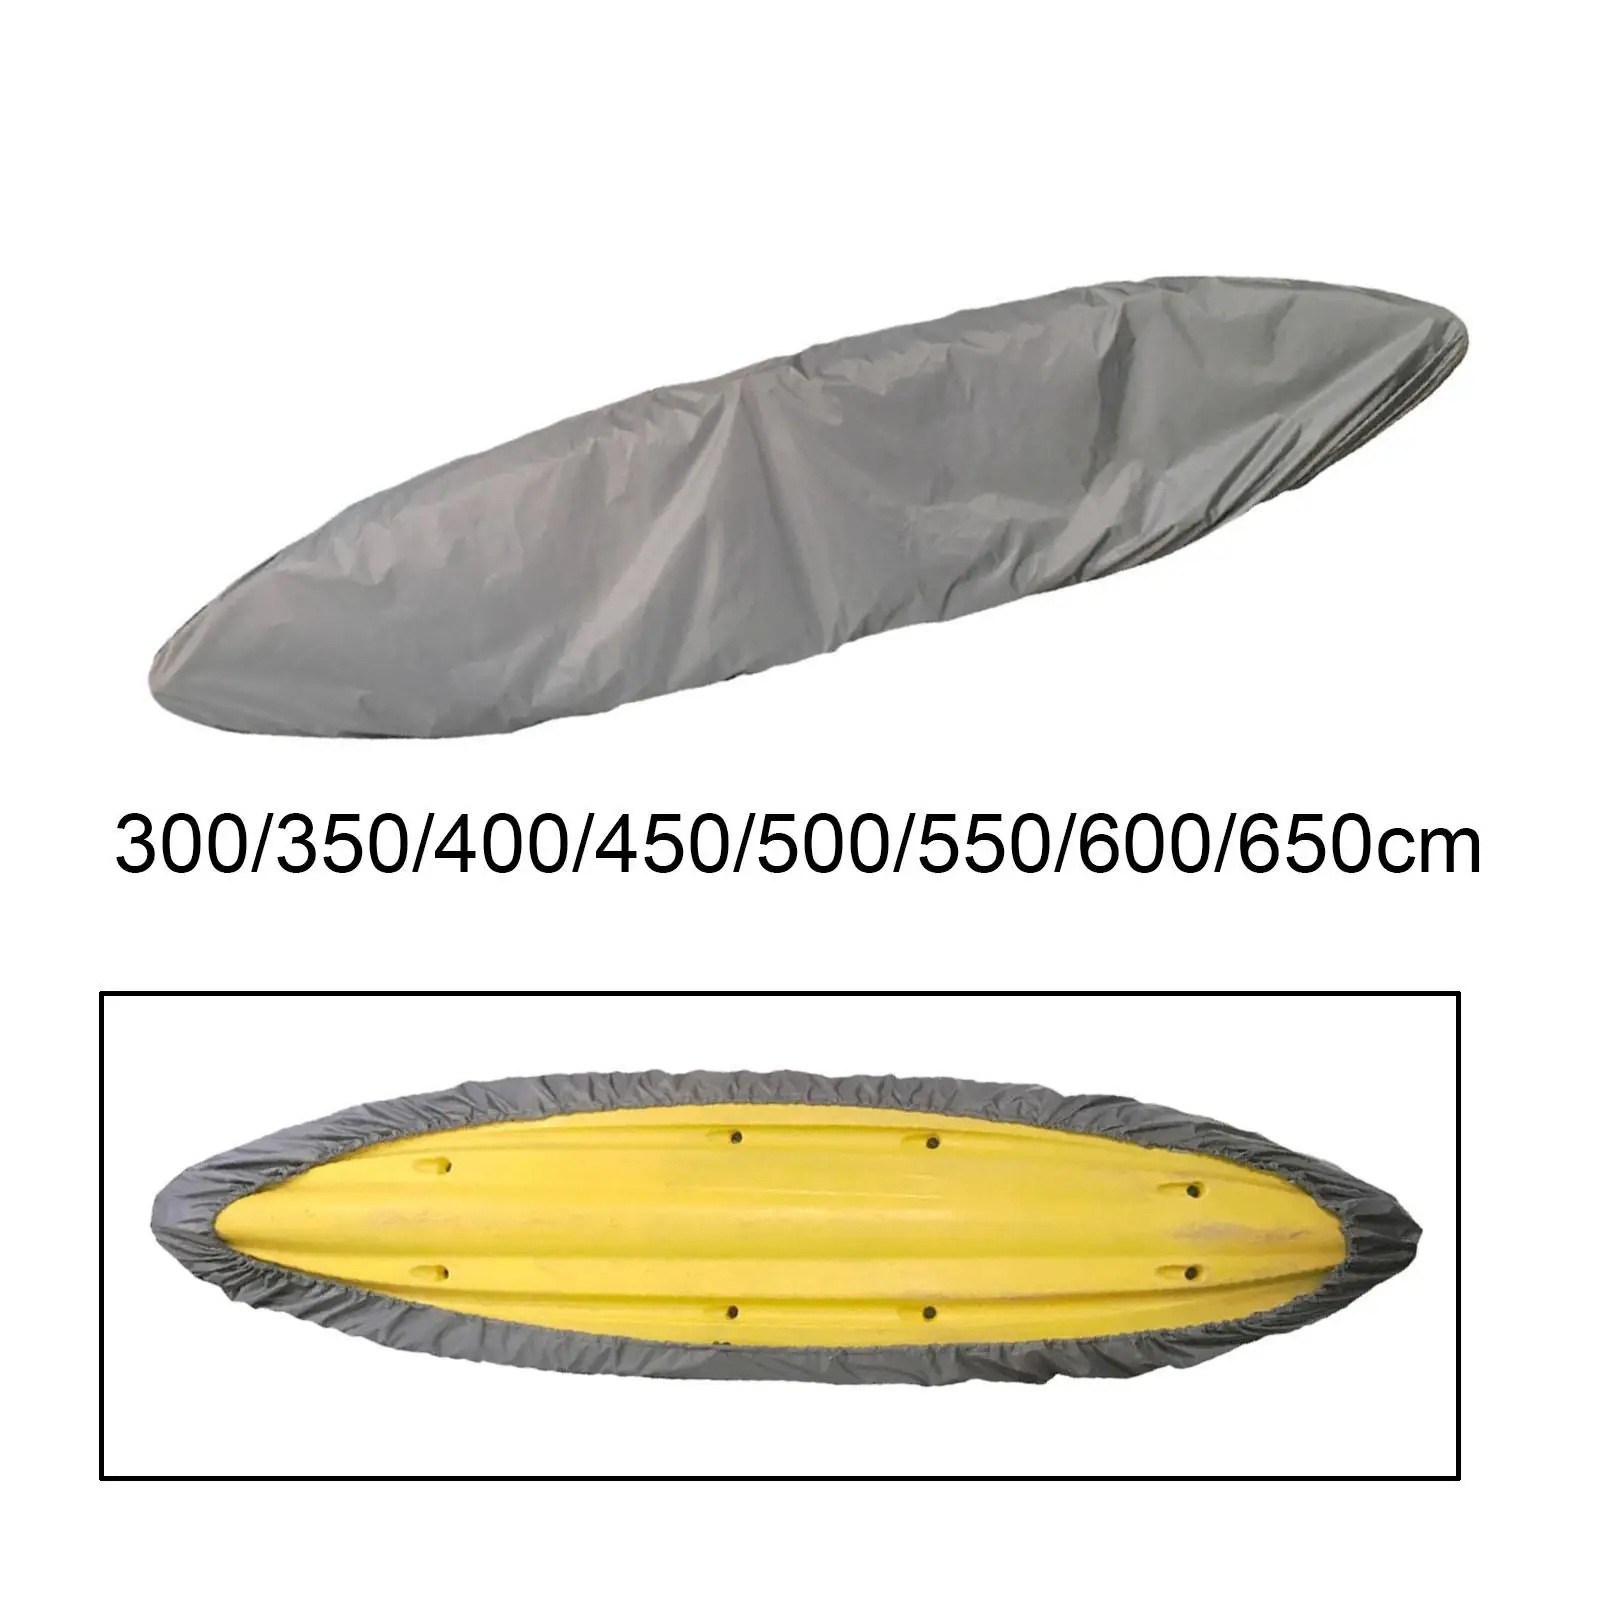 Boat Storage Cover Kayak Canoe Cover Protector Canoe Cover Waterproof Kayak Cover for Kayaking Canoeing Water Sports Drifting